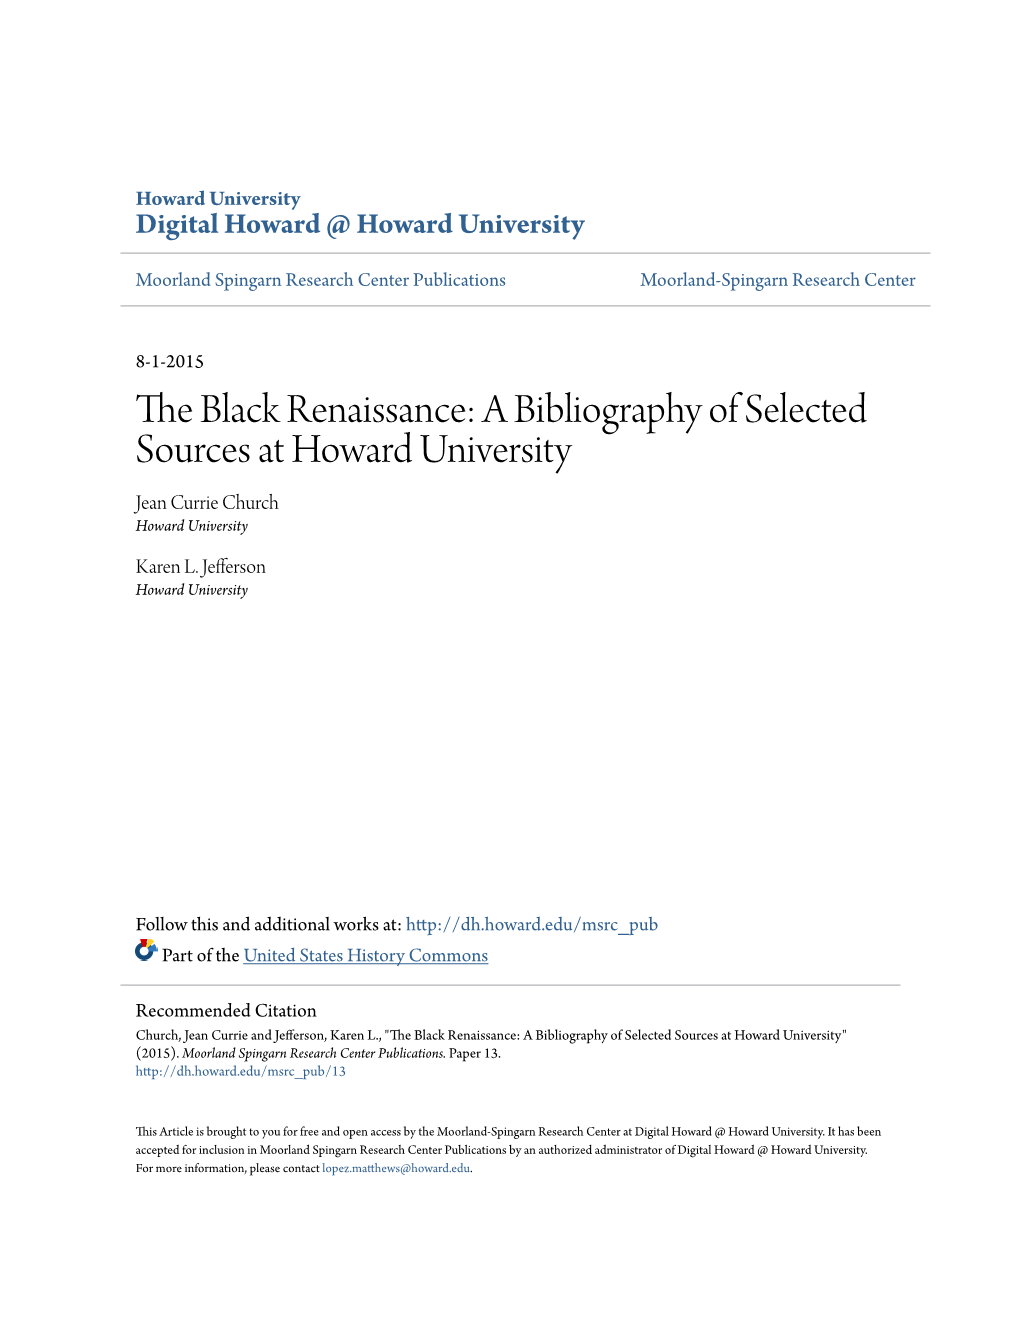 The Black Renaissance: R Bibliography of Selected Sources at Howard Uniuersity